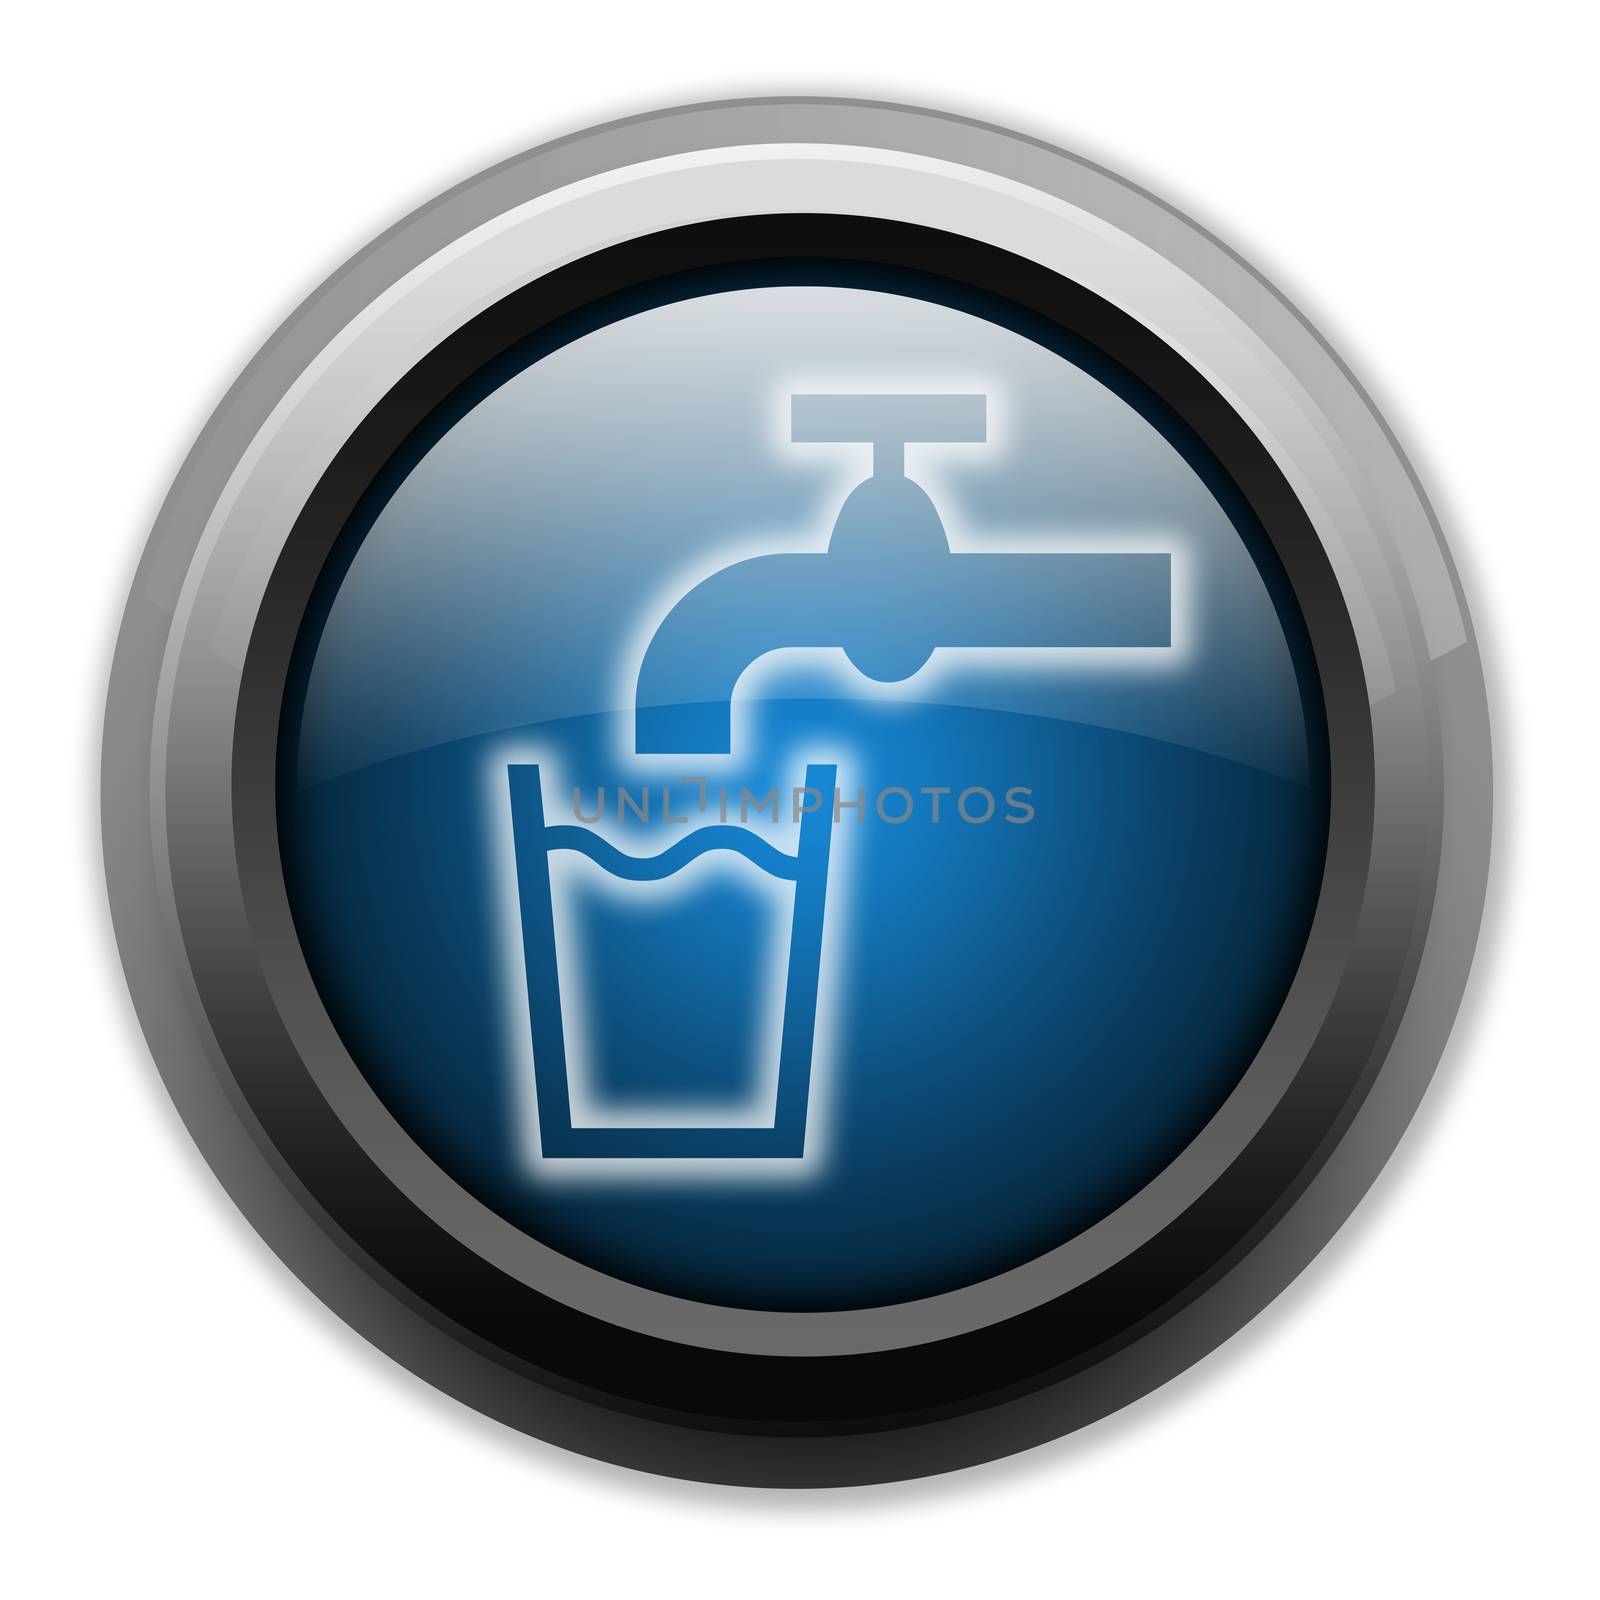 Icon, Button, Pictogram Running Water by mindscanner